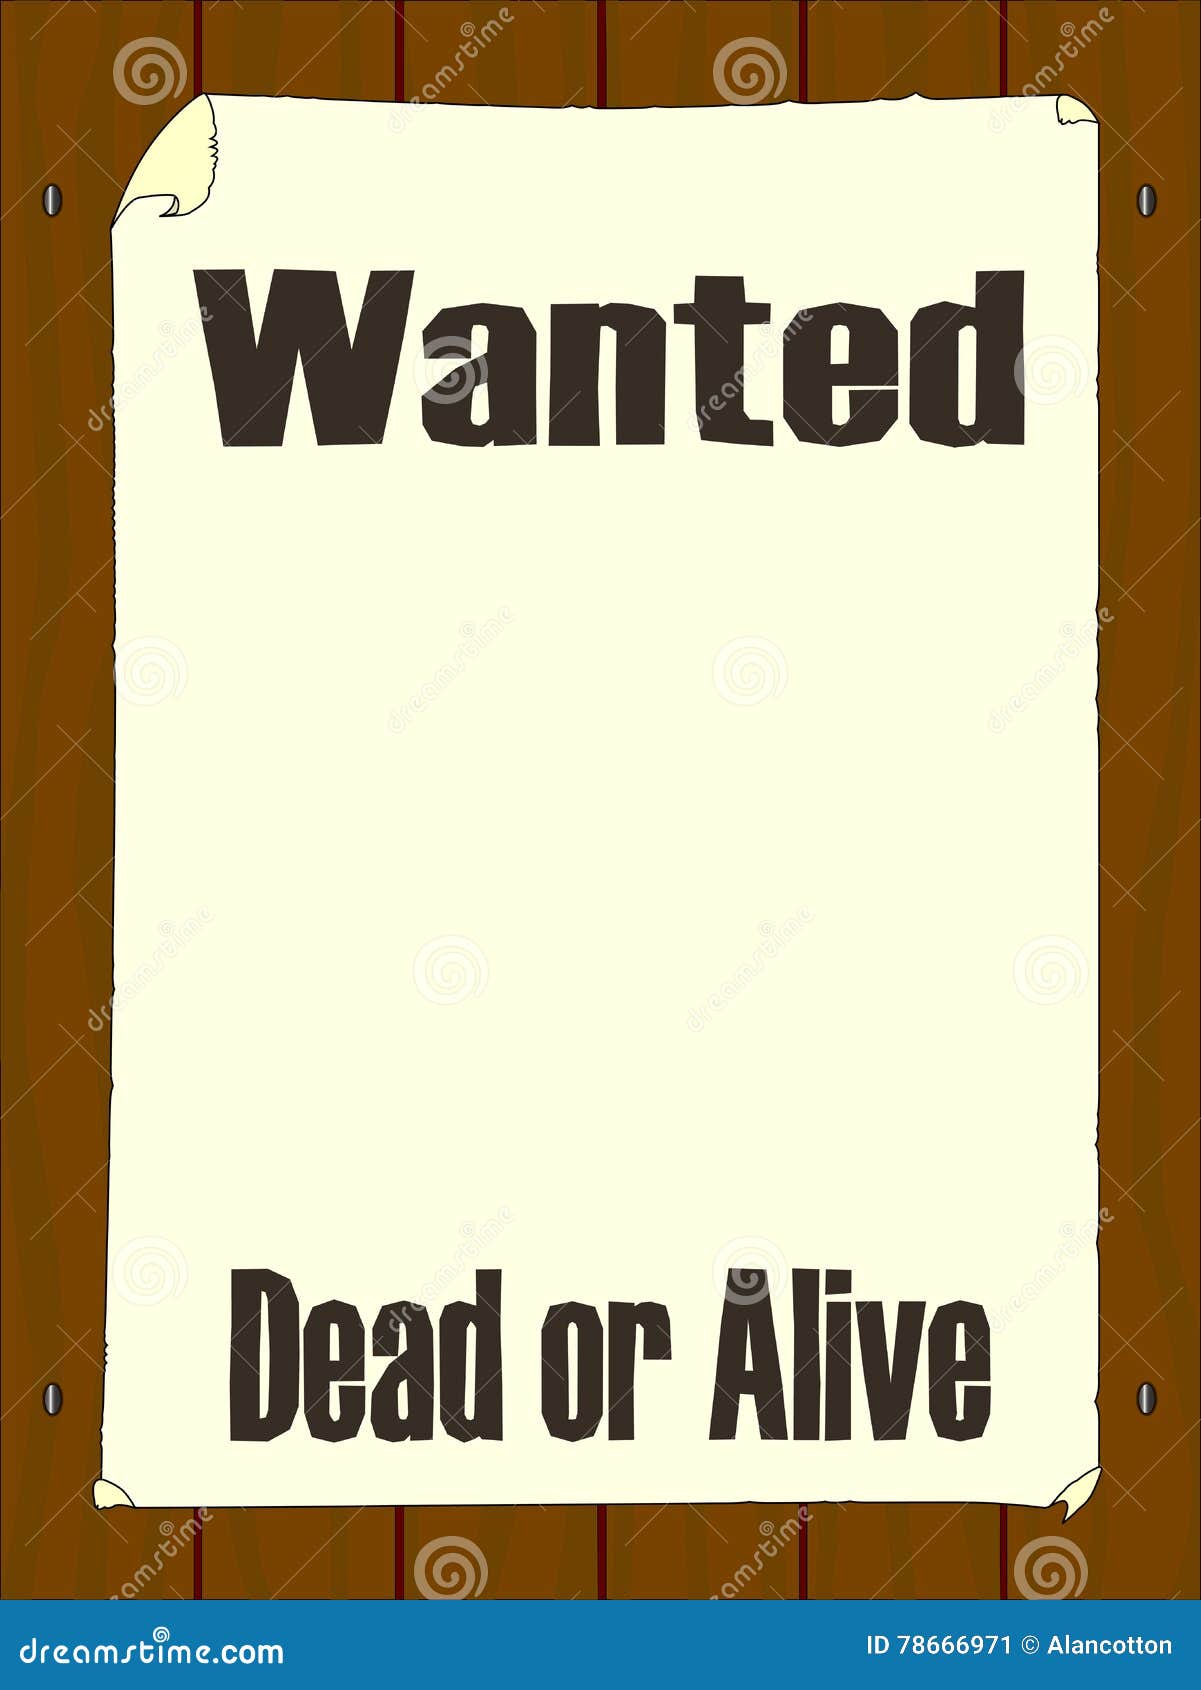 Wanted Dead or Alive stock vector. Illustration of alive - 78666971